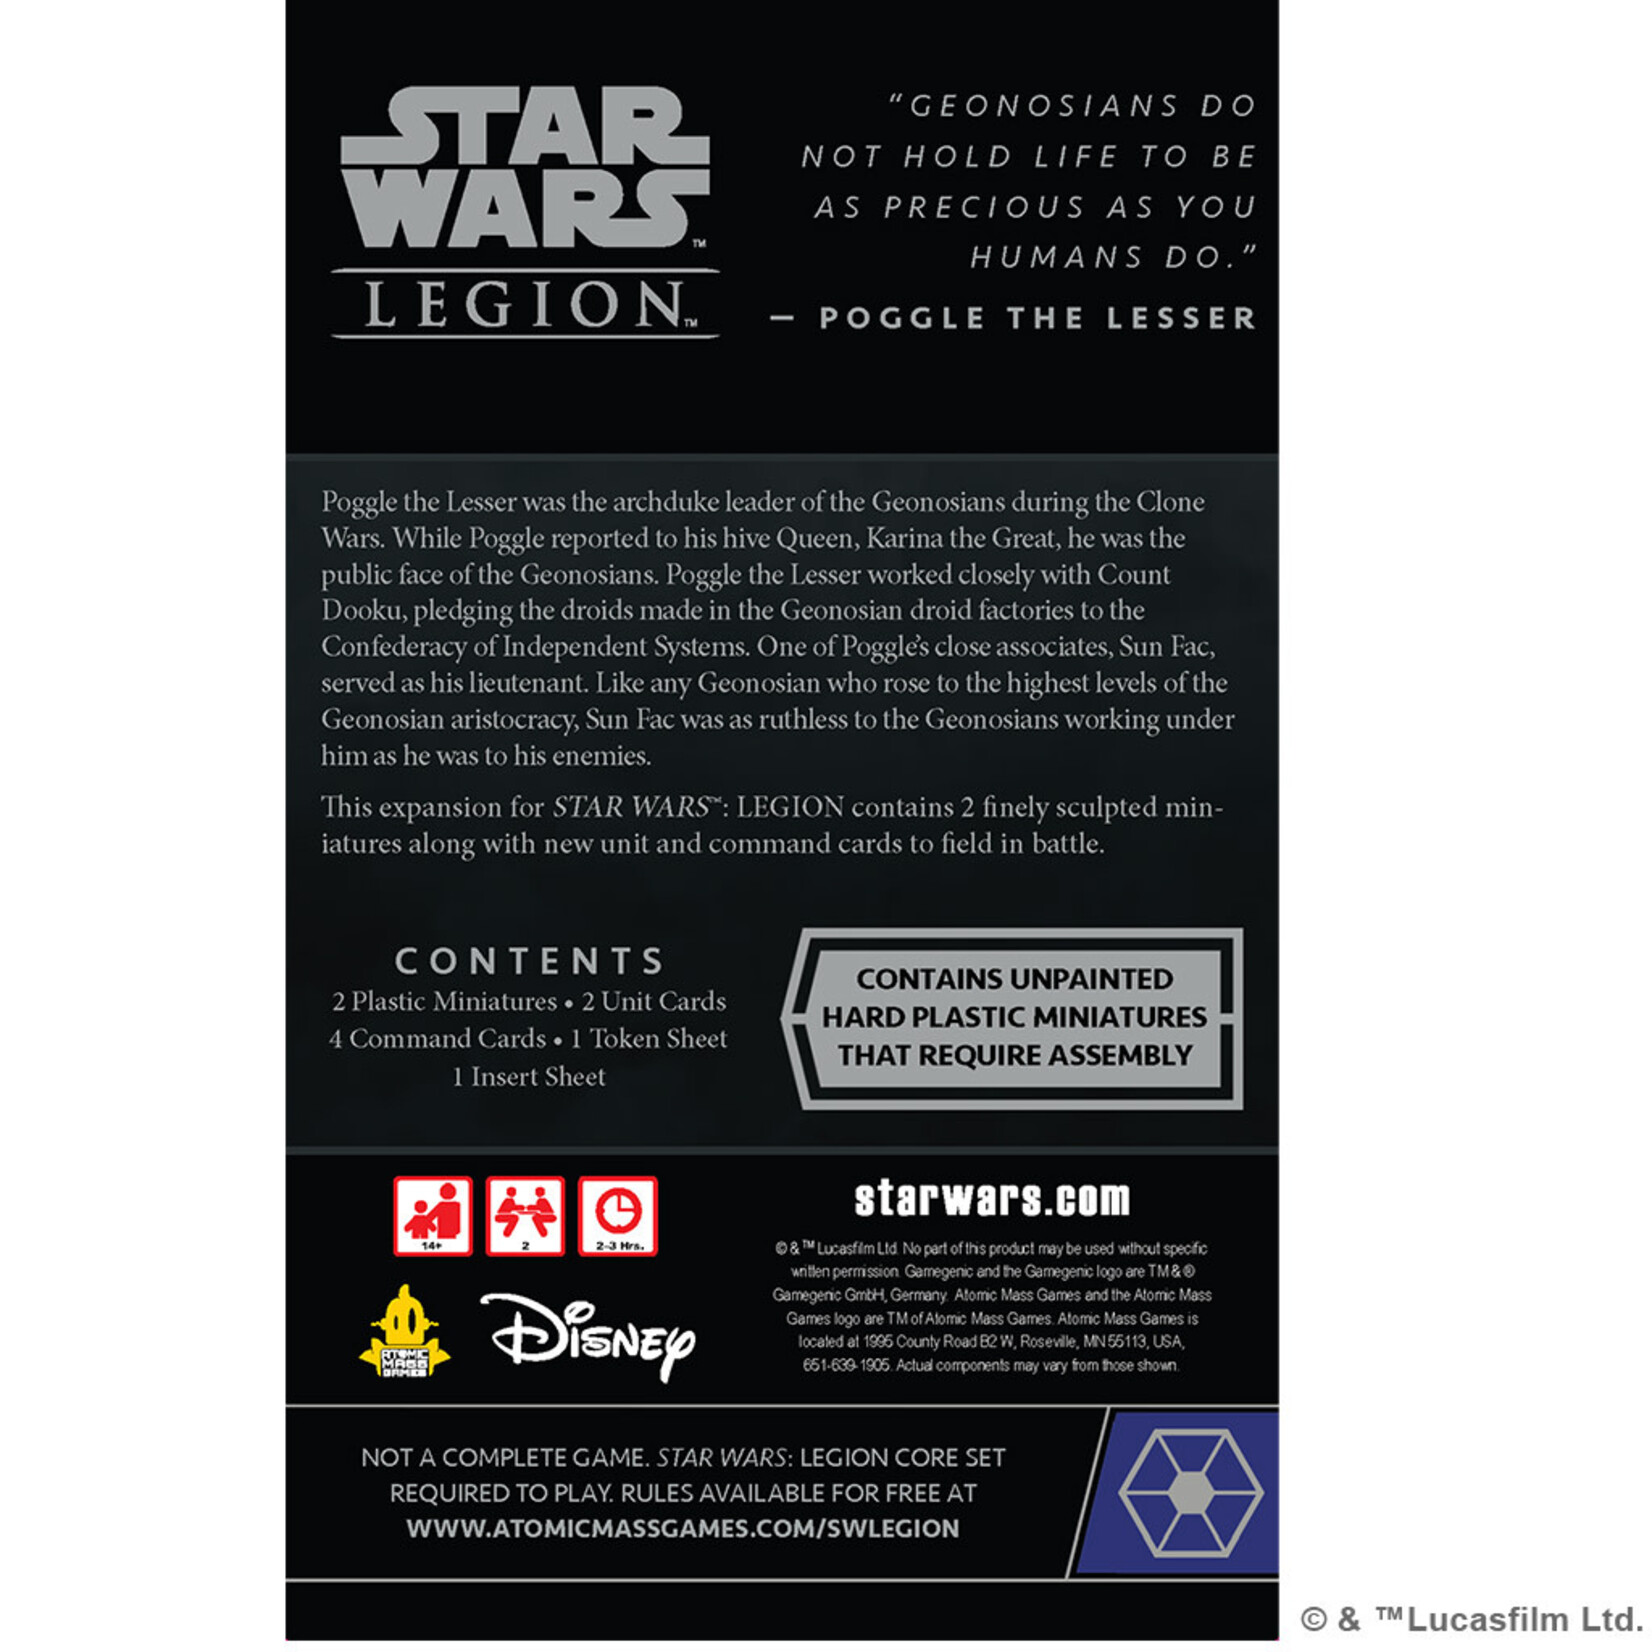 Atomic Mass Games Star Wars: Legion - Sun Fac and Poggle the Lesser Operative and Commander Expansion